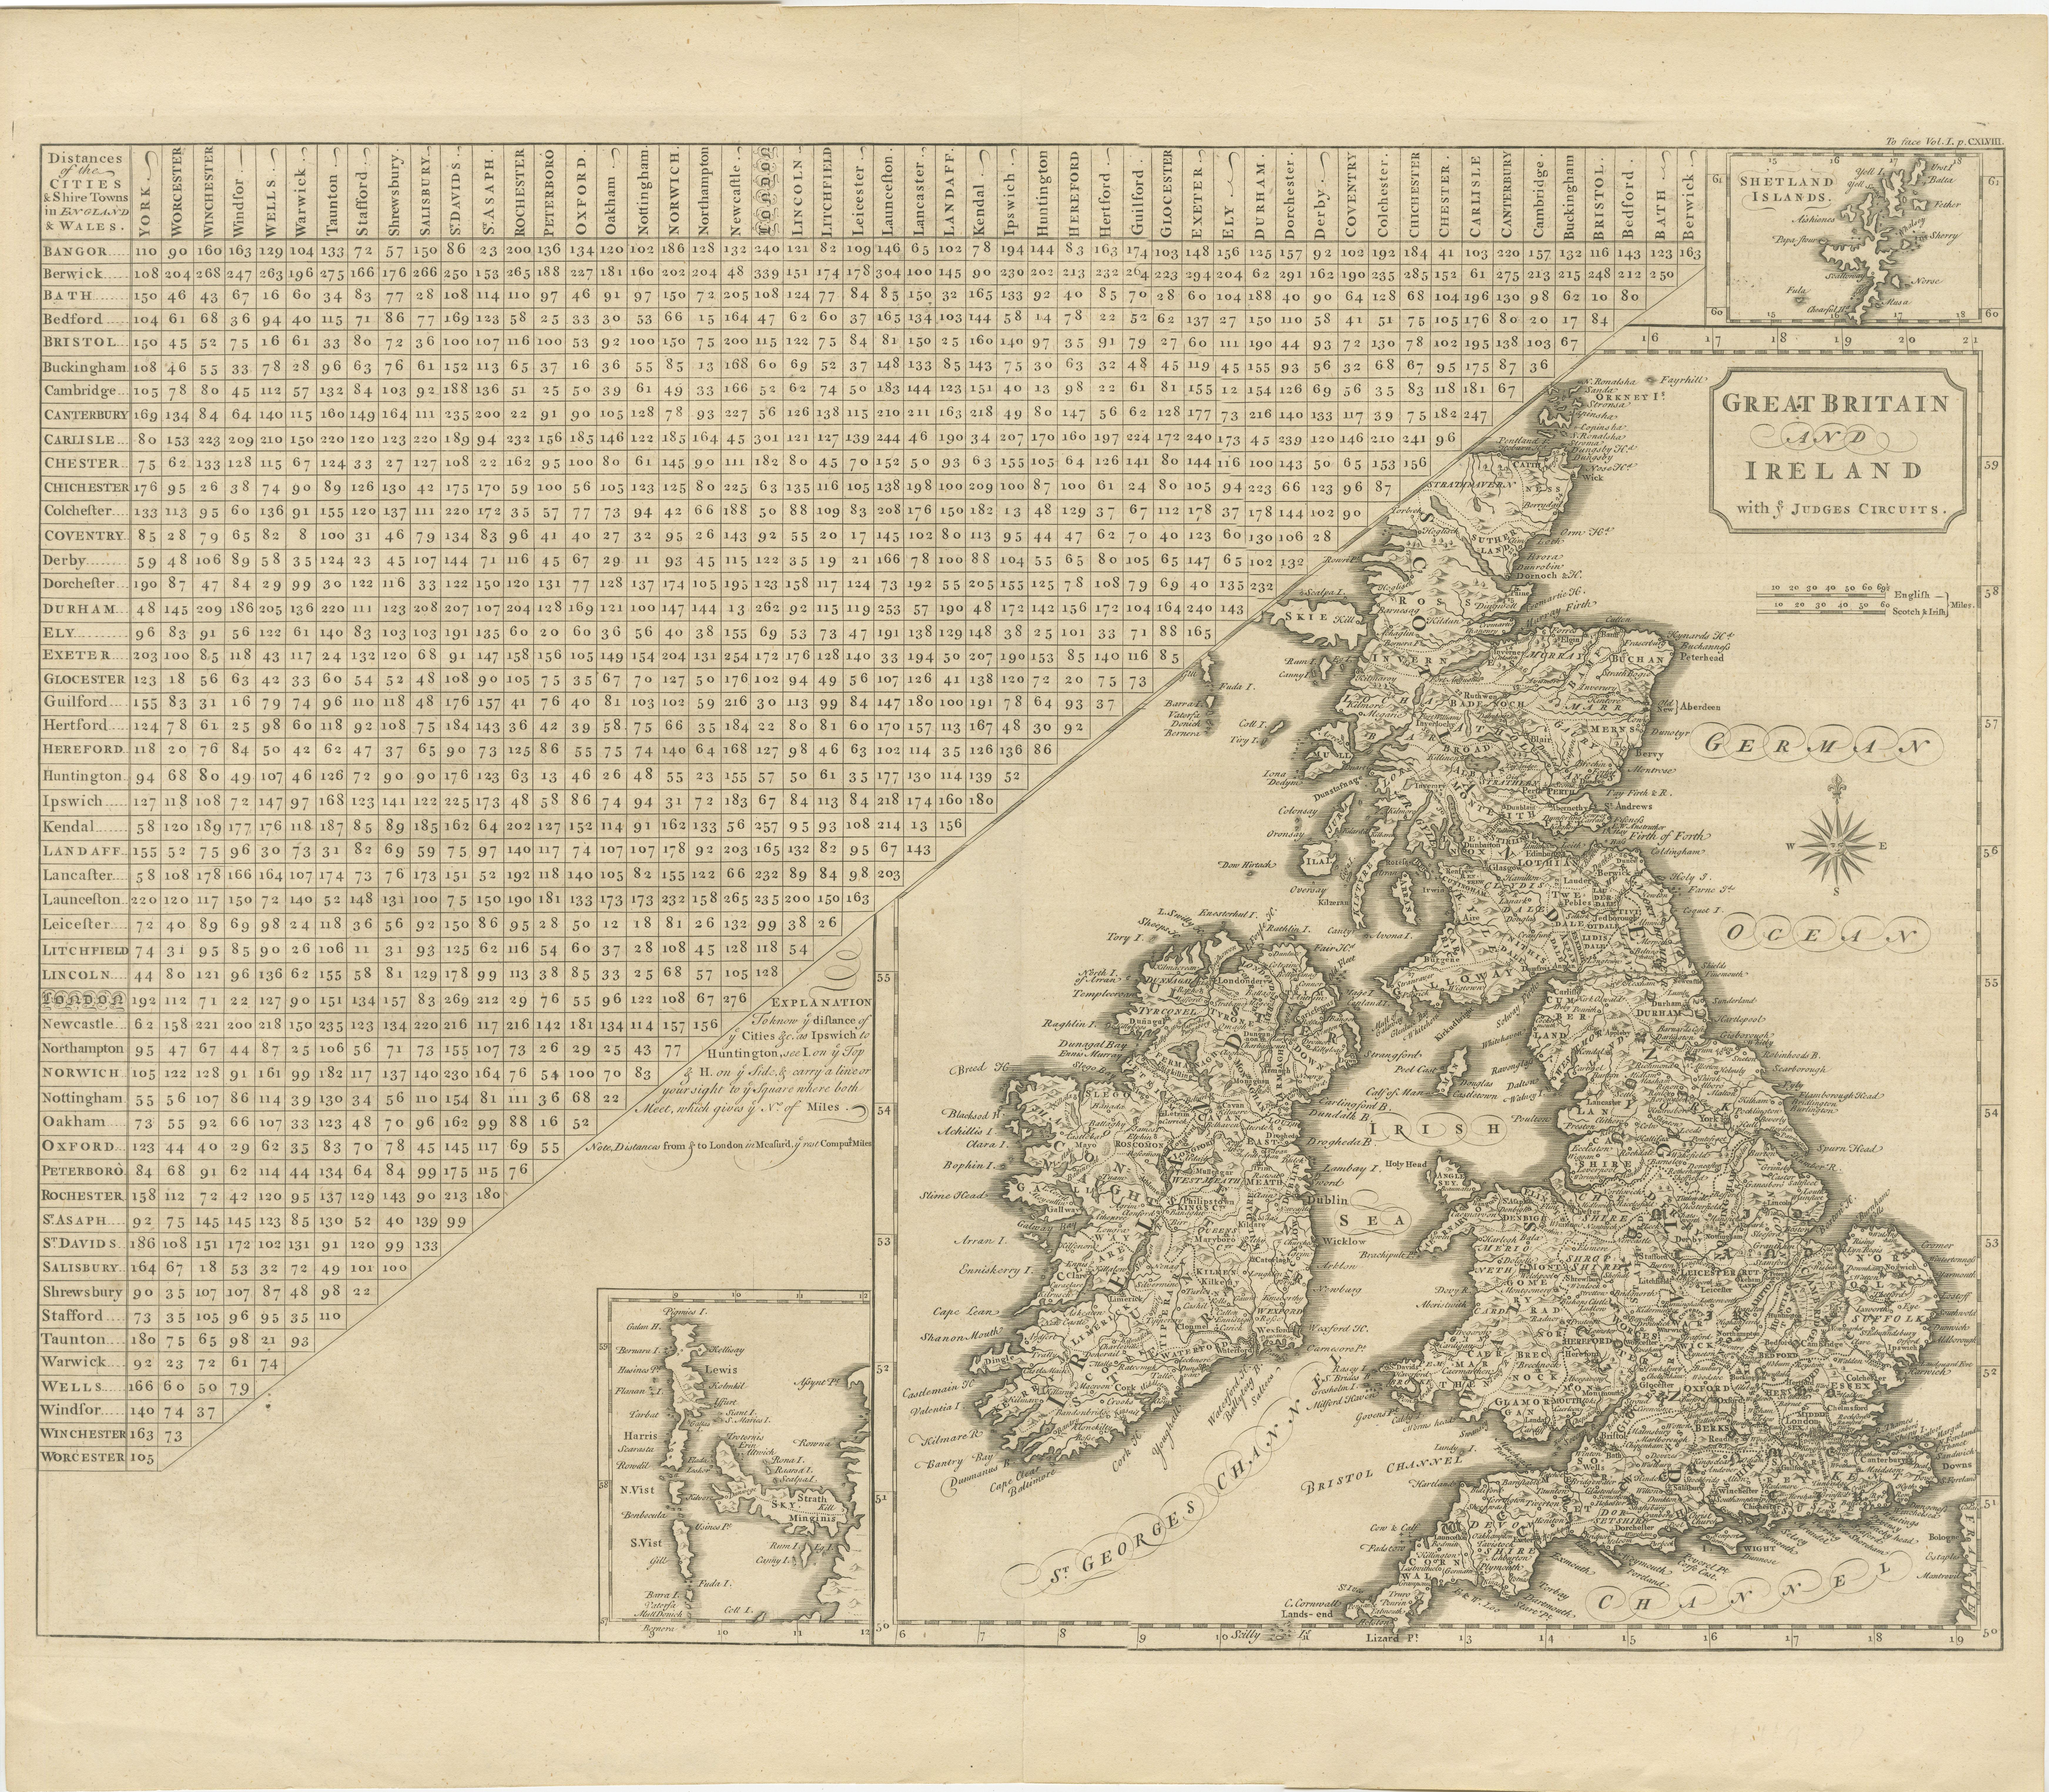 Antique map titled 'Great Britain and Ireland with ye Judges Circuits'. A scarce map of the British Isles, with inset maps of the Shetland Islands and The Hebrides. Large triangular distance chart titled 